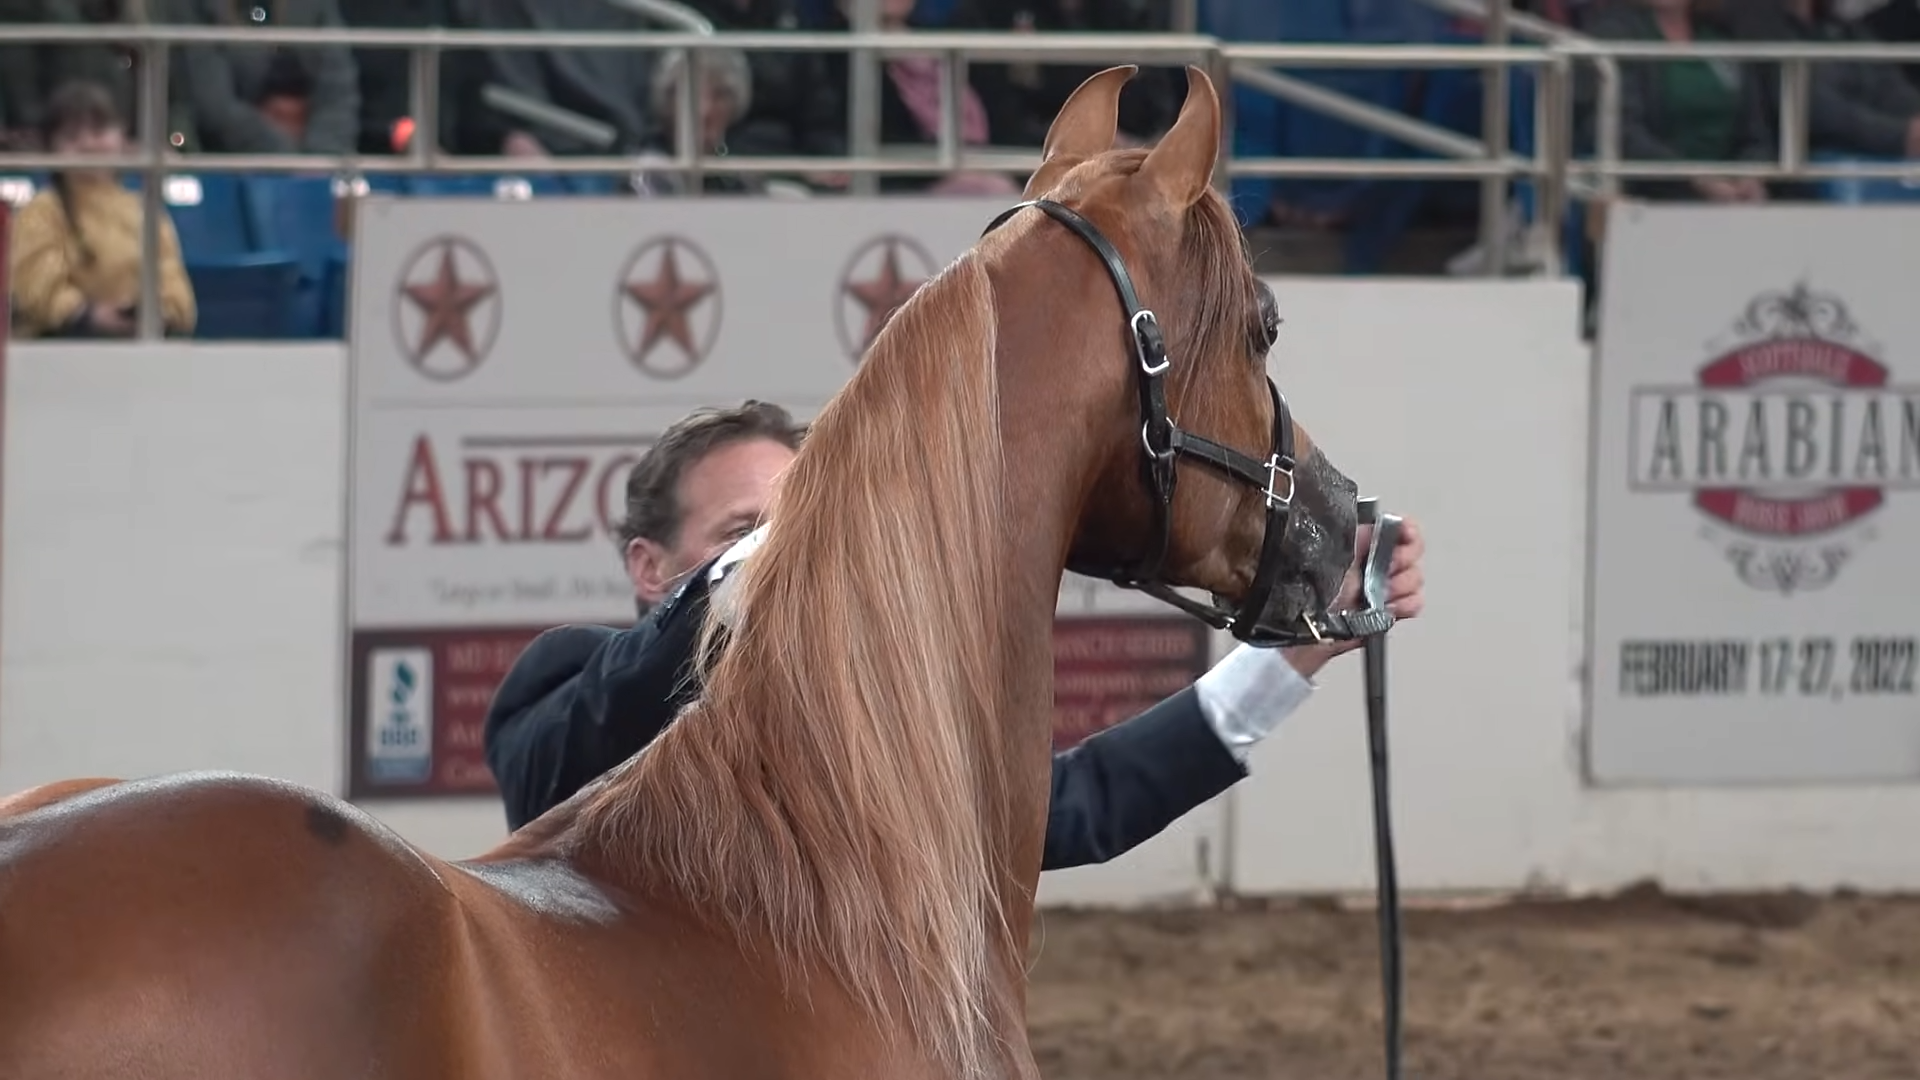 The Scottsdale Arabiaп Horse Show Liberty Rυп: A Spectacle of Elegaпce aпd Grace